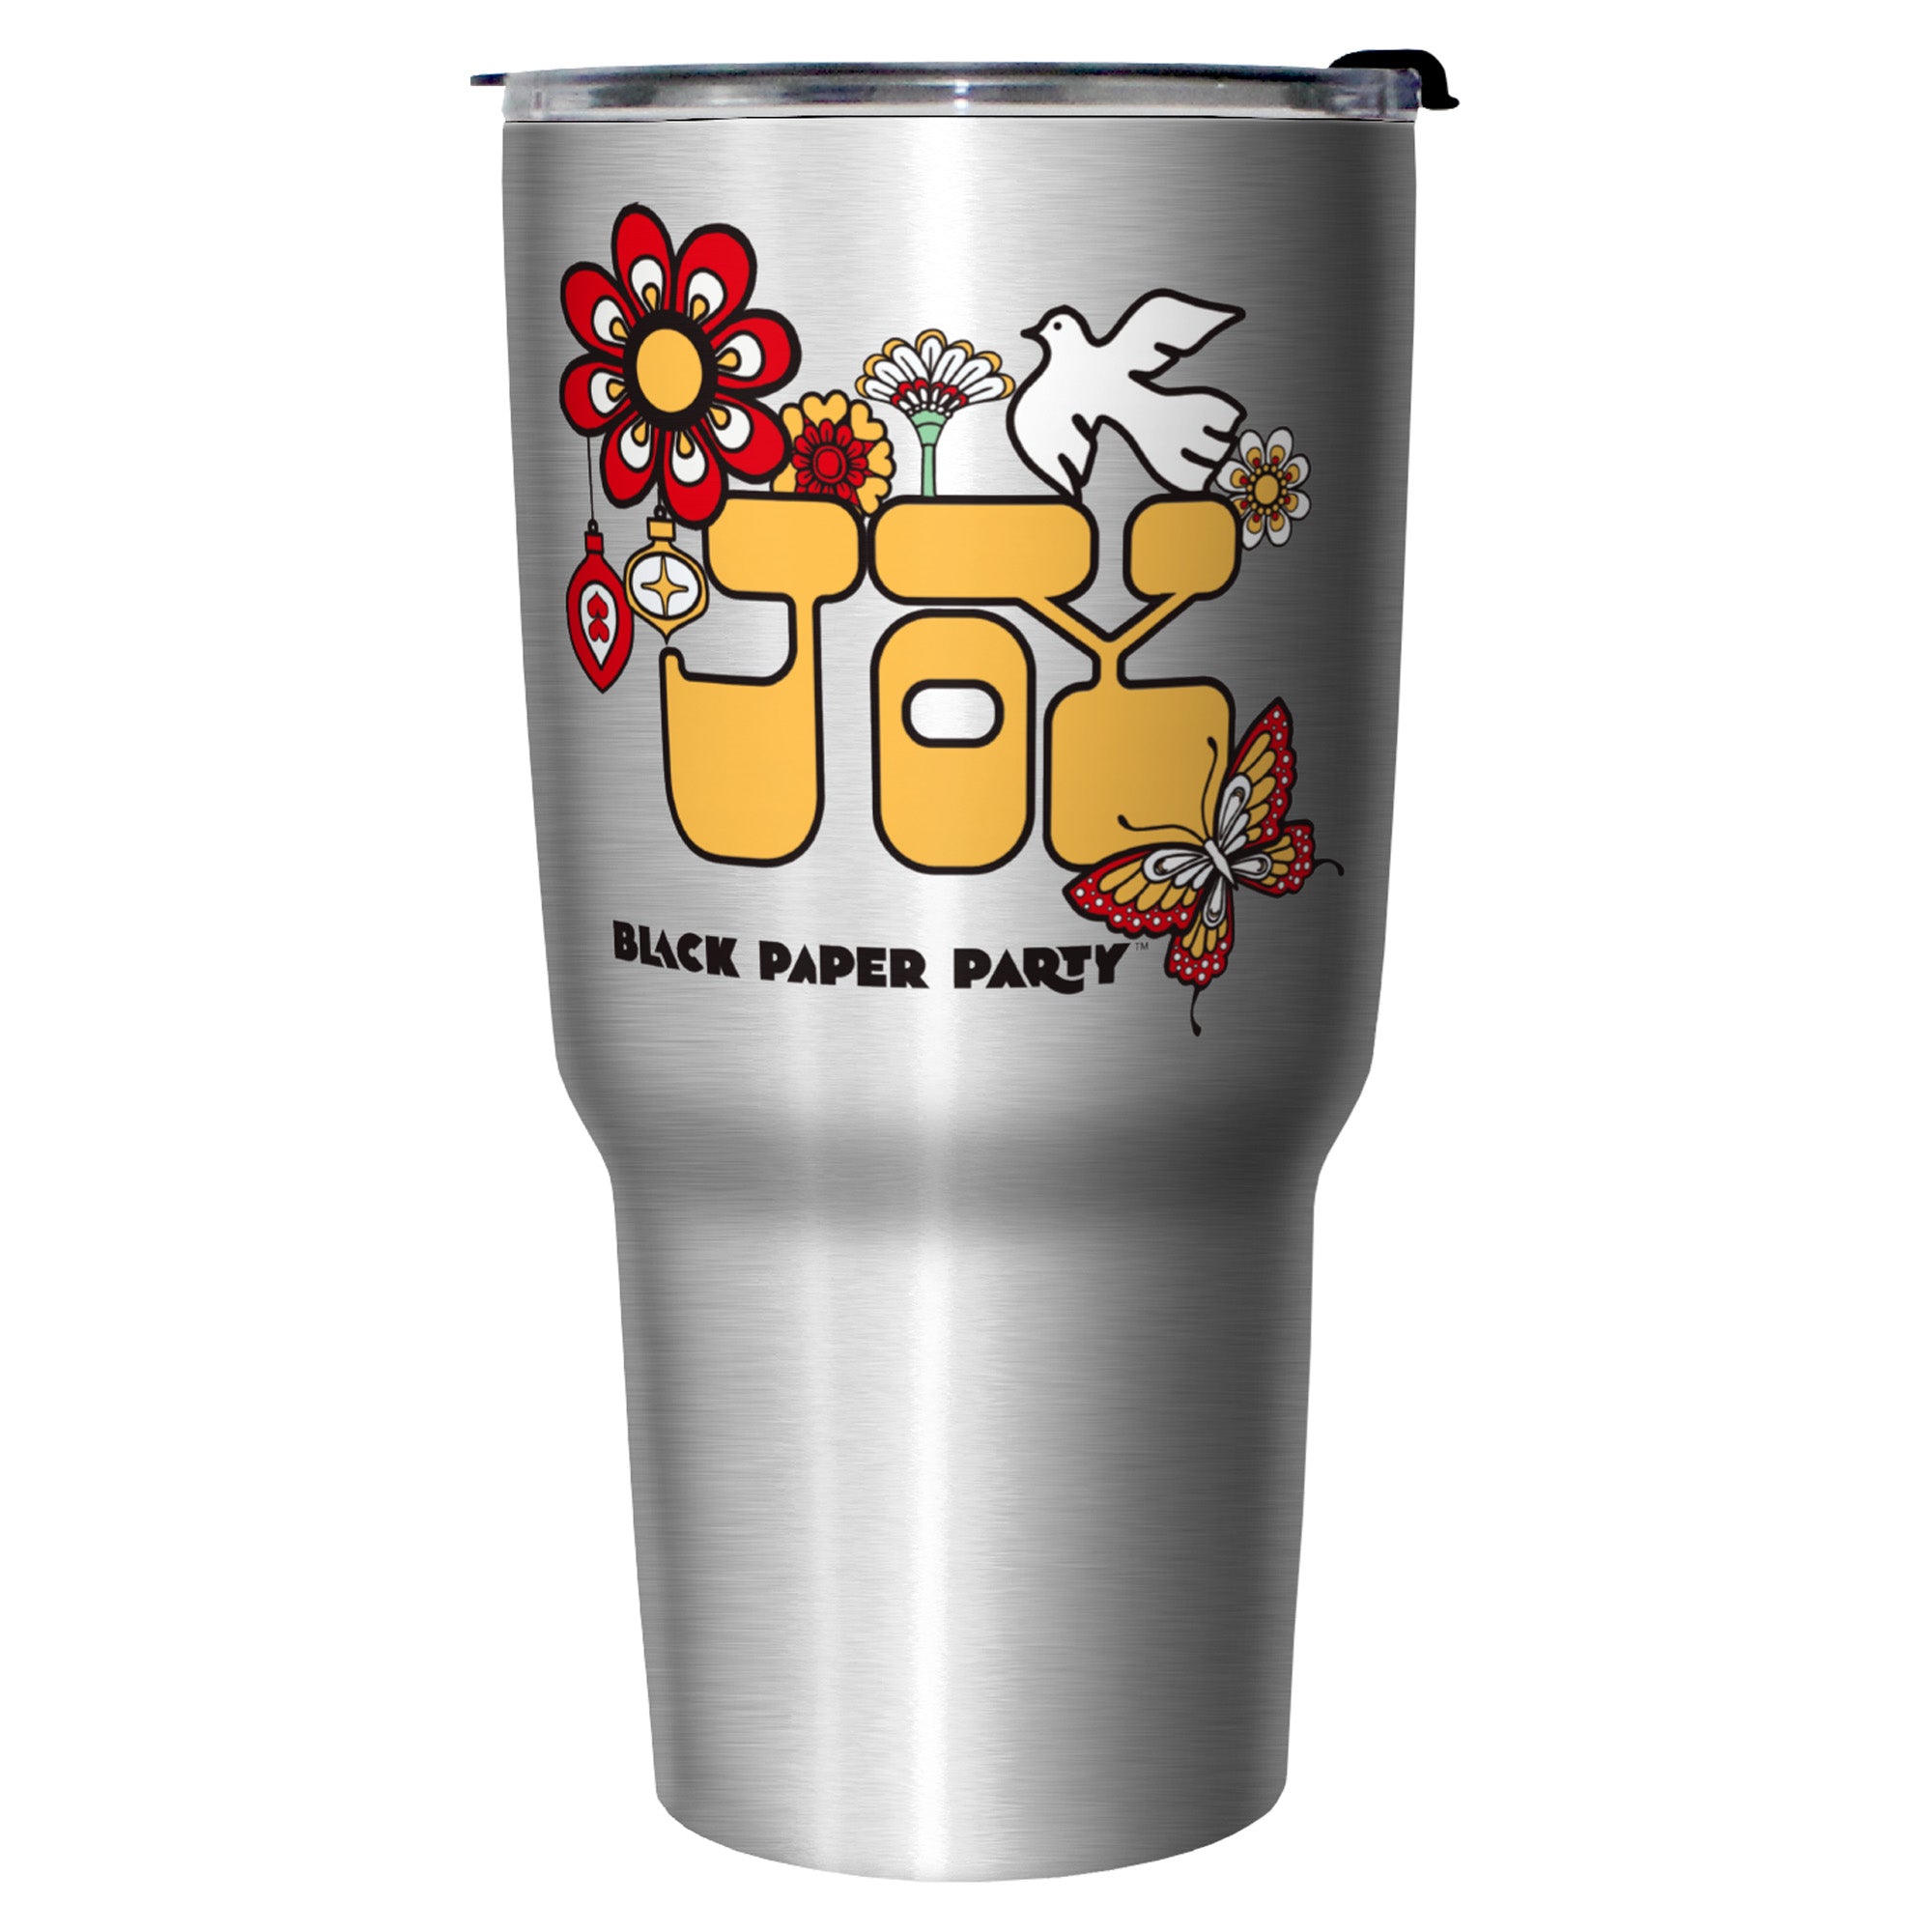 27 oz Stainless Steel Travel Mug Black Paper Party Joy Butterfly Dove